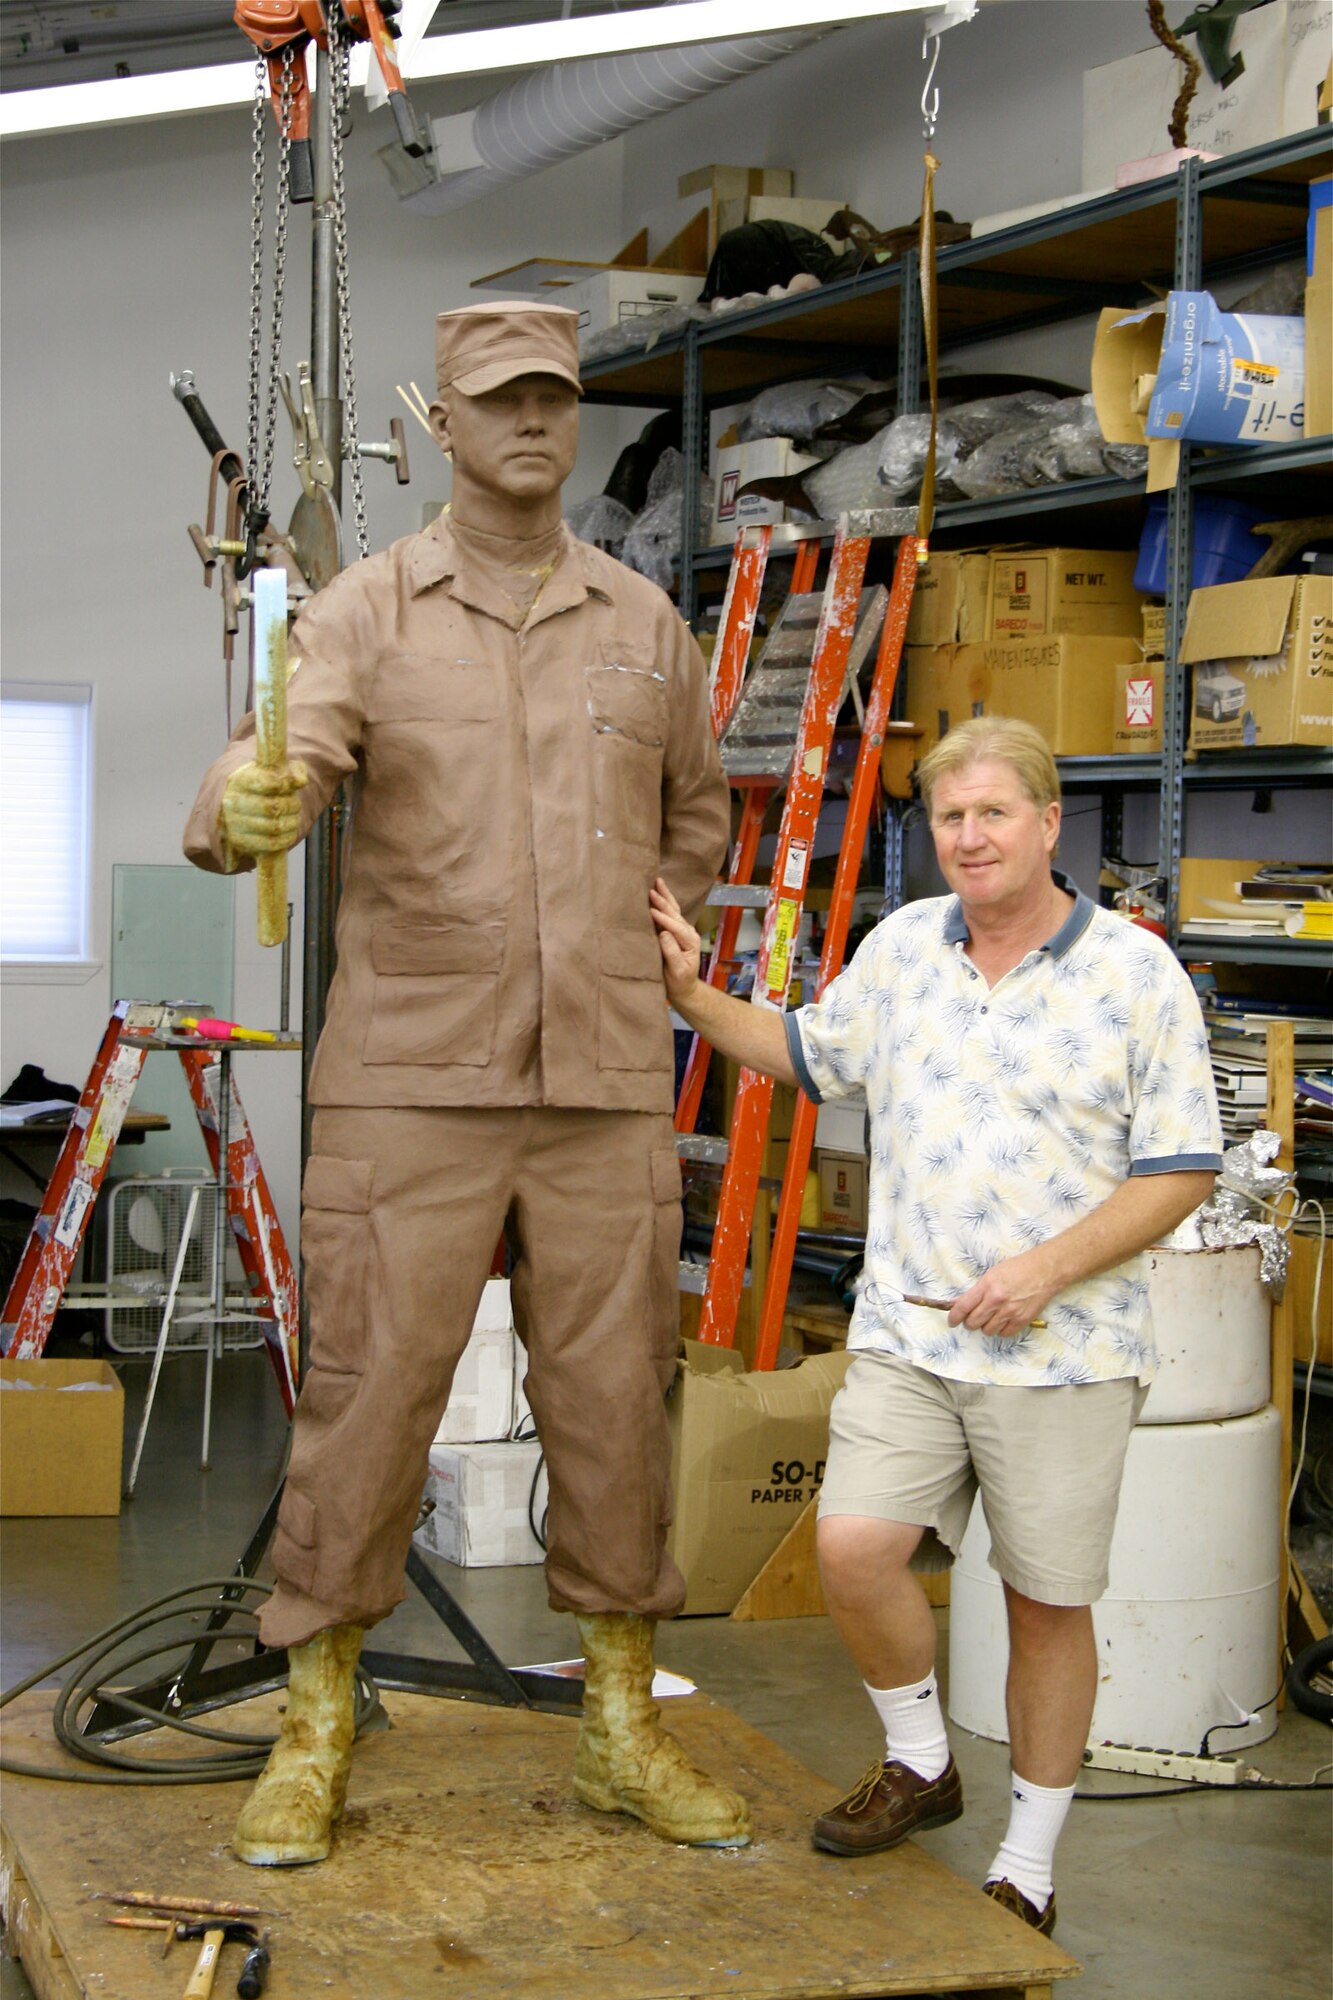 For the memorial to first sergeants the Air Force First Sergeants Academy is in the process of completing, sculptor Michael Maiden works on the yet unfinished male first sergeant statue at his studio in Oregon. For the finished memorial, this statue will be joined by a female first sergeant statue and be located at the Enlisted Heritage Hall museum at Maxwell's Gunter Annex. (Courtesy photo)